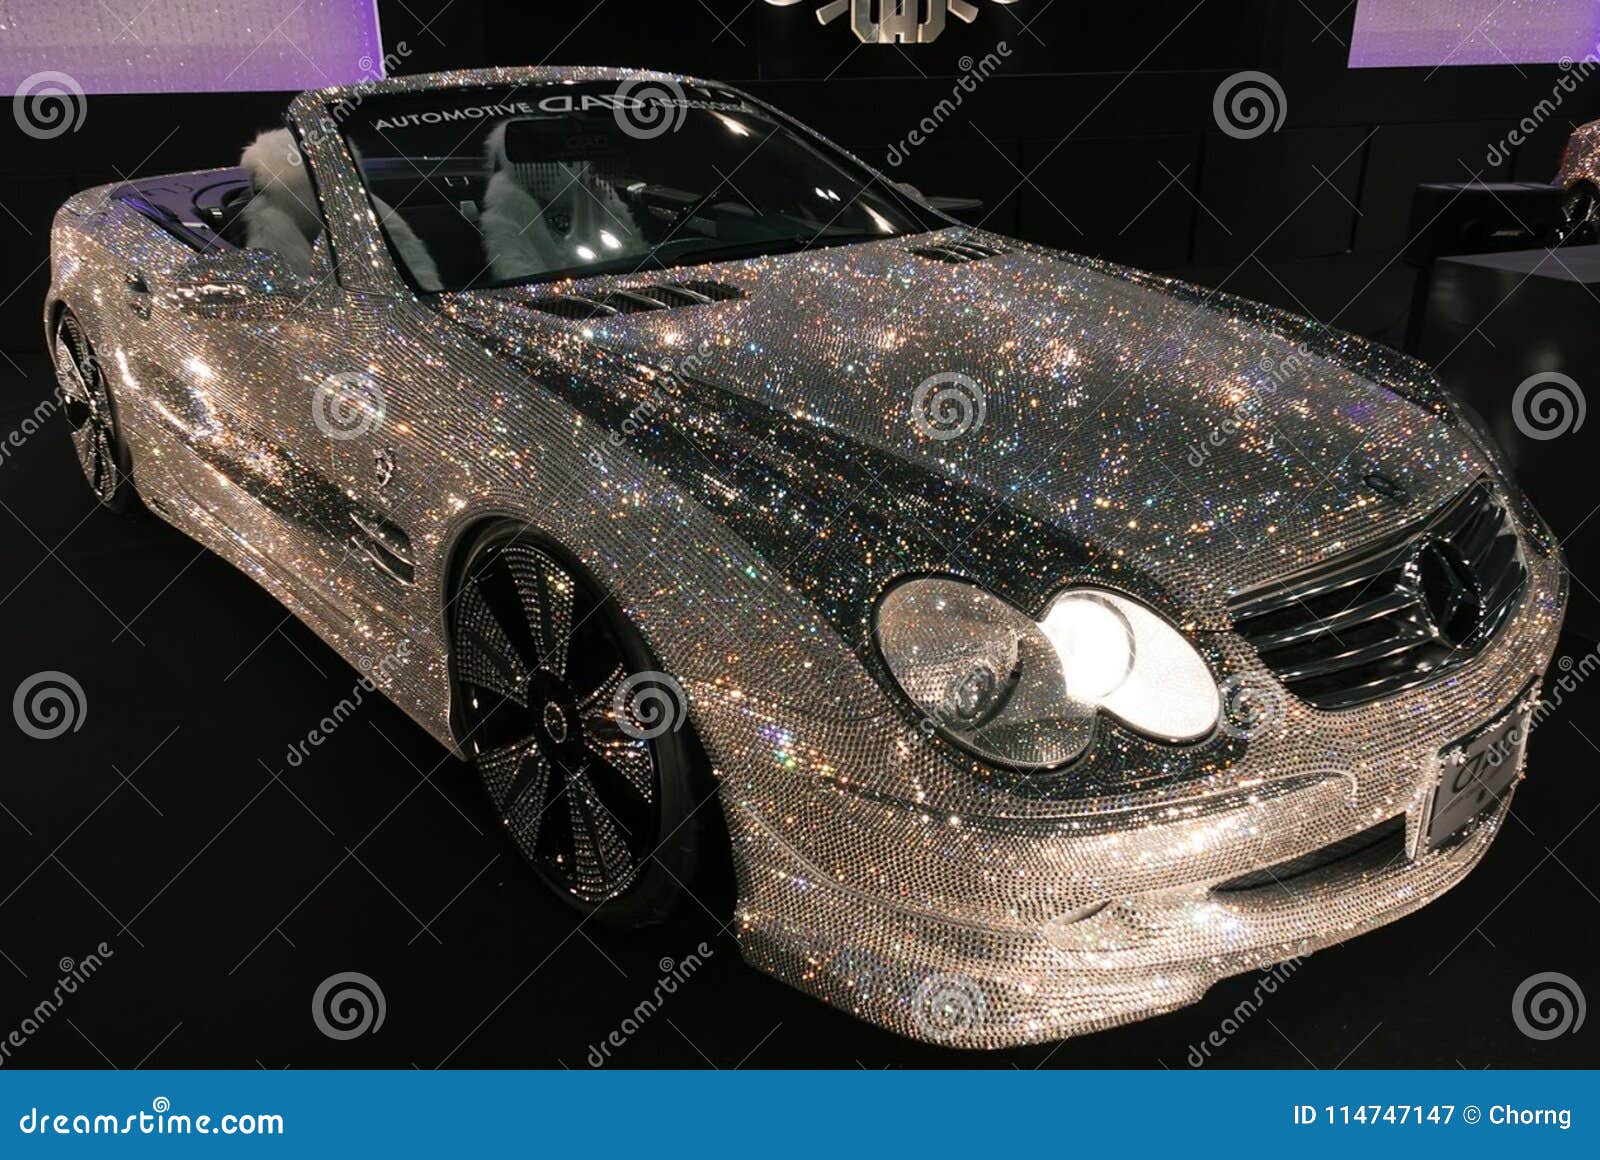 Bling Bling Diamond Mercedes Modification Editorial Photography Image Of Diamond People